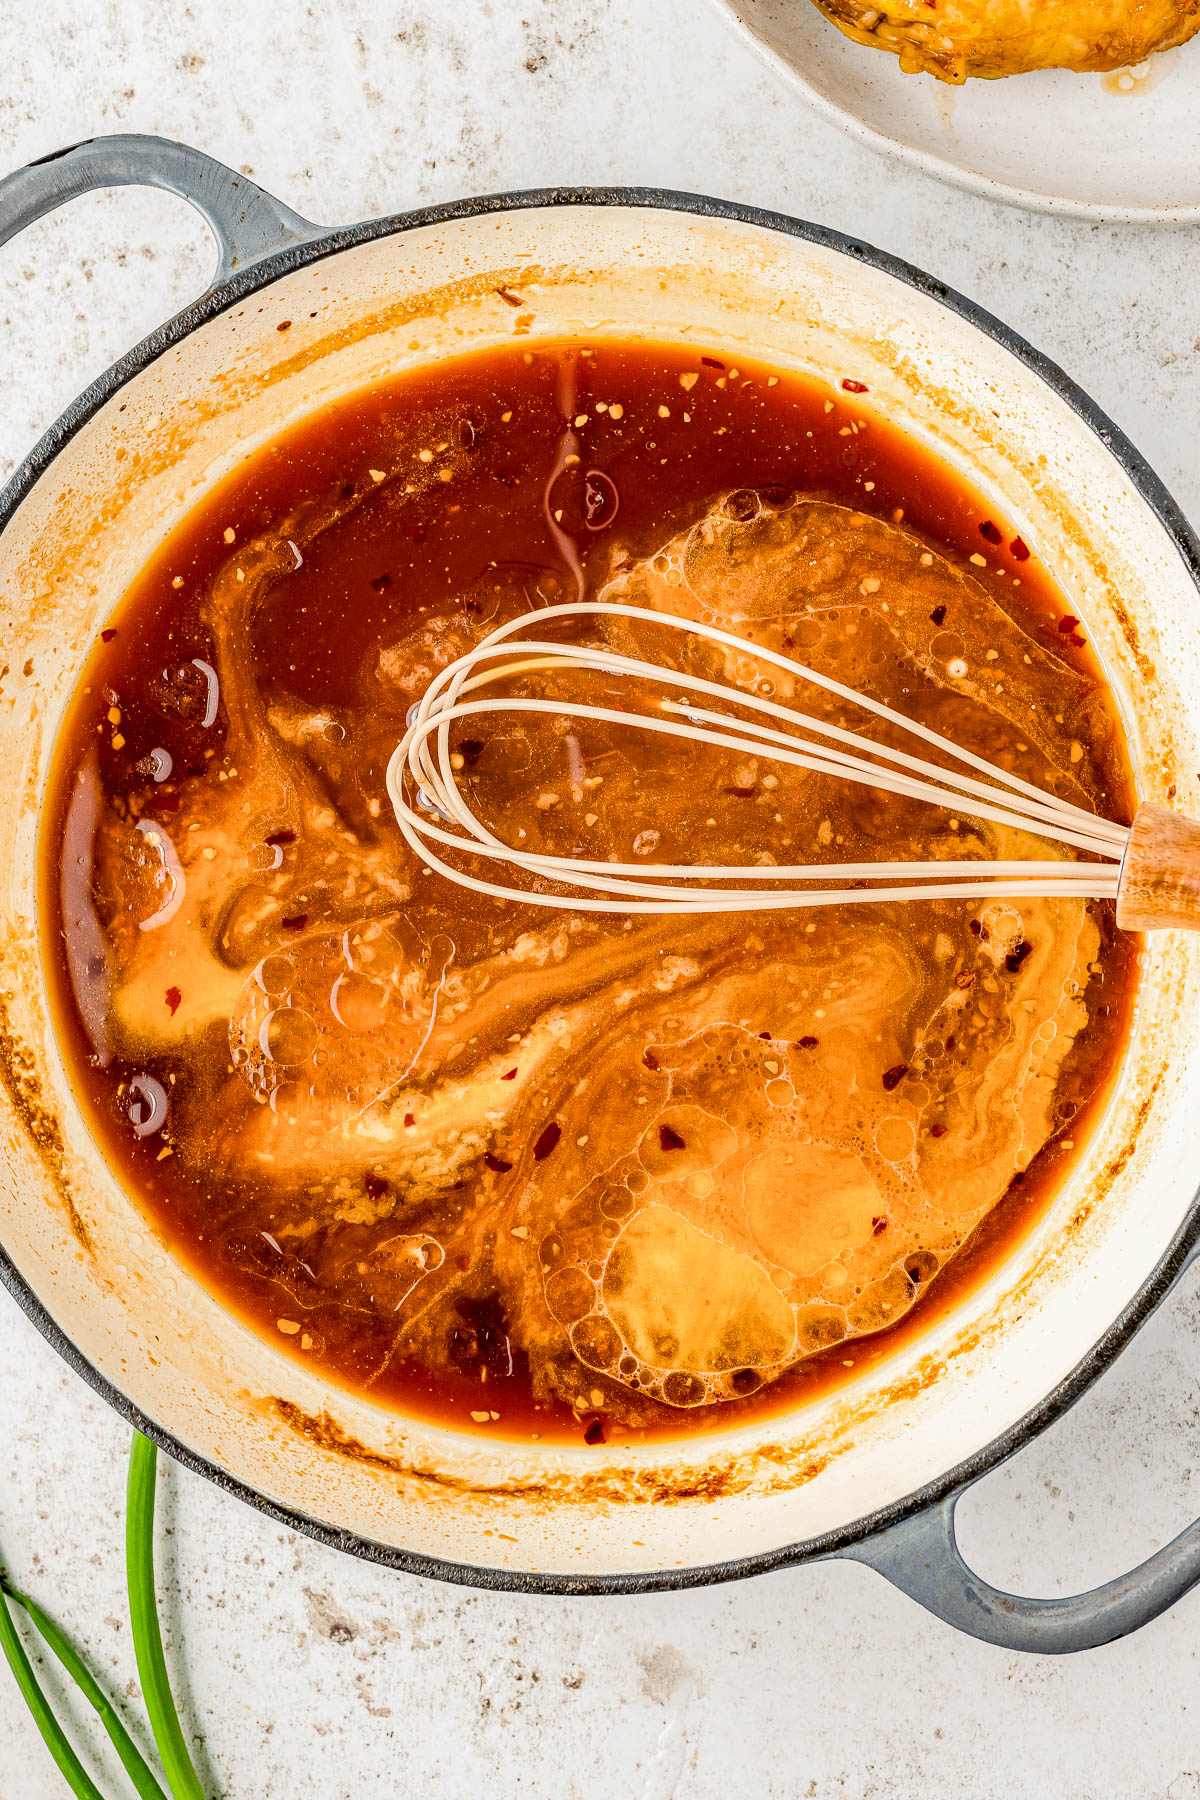 Close-up of a whisk stirring a rich, bubbling red sauce in a black pot, with hints of spices and oil droplets on the surface.